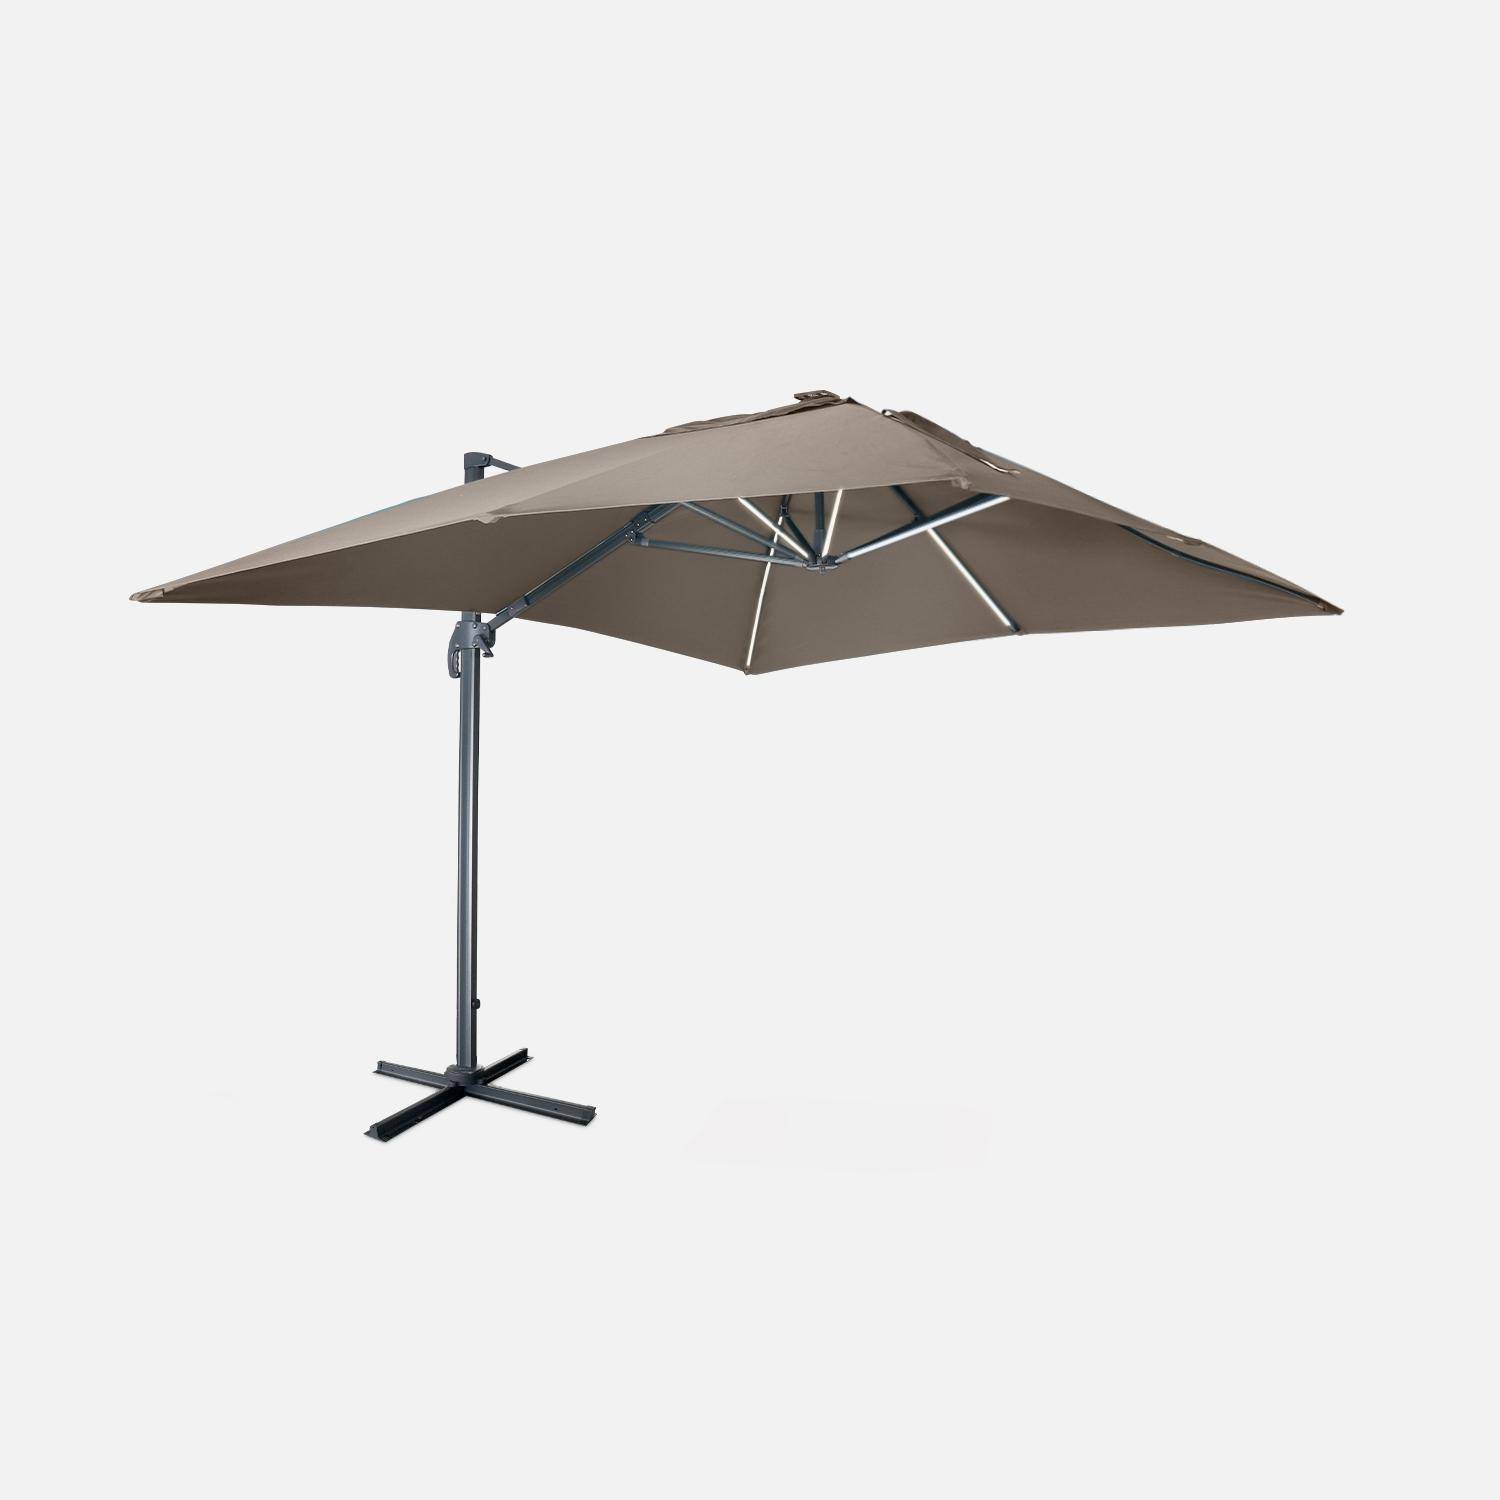 Premium quality rectangular 3x4m cantilever parasol with solar-powered integrated LED lights, tiltable, foldable , 360° rotation, cover included, beige Photo1